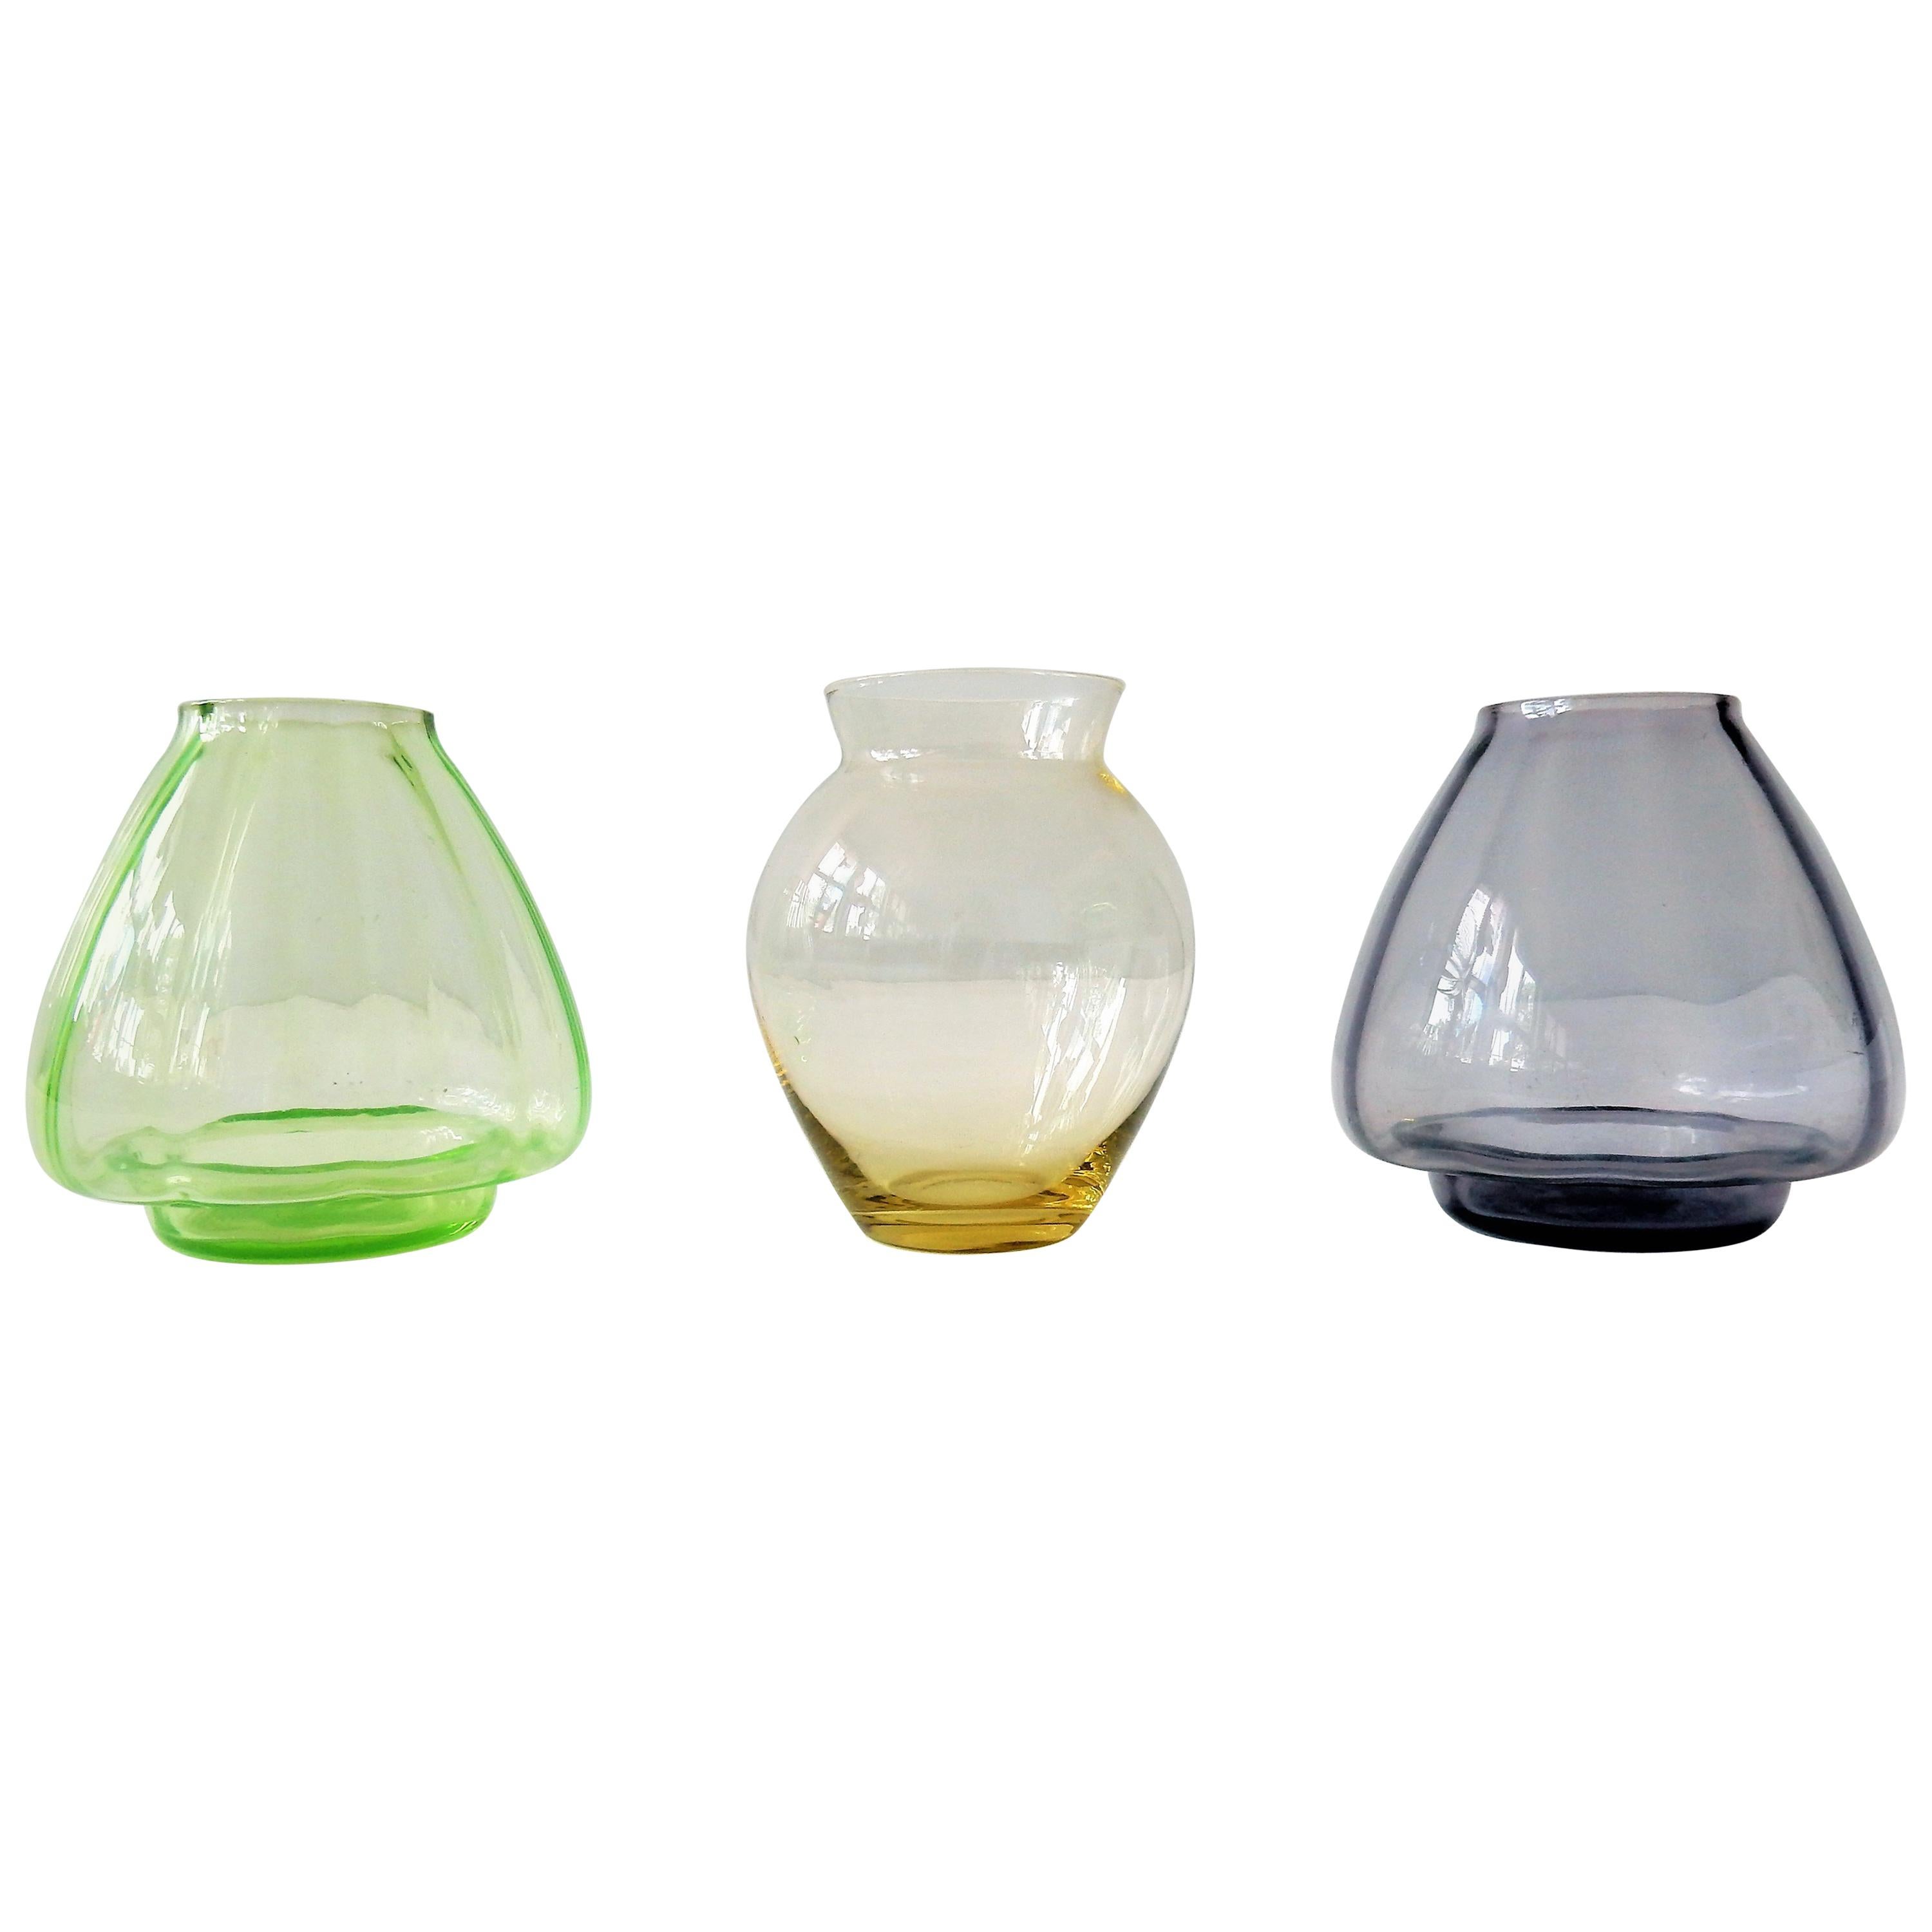 Set of Three Small Colored Glass Vases by A.D. Copier, the Netherlands, 1930s For Sale